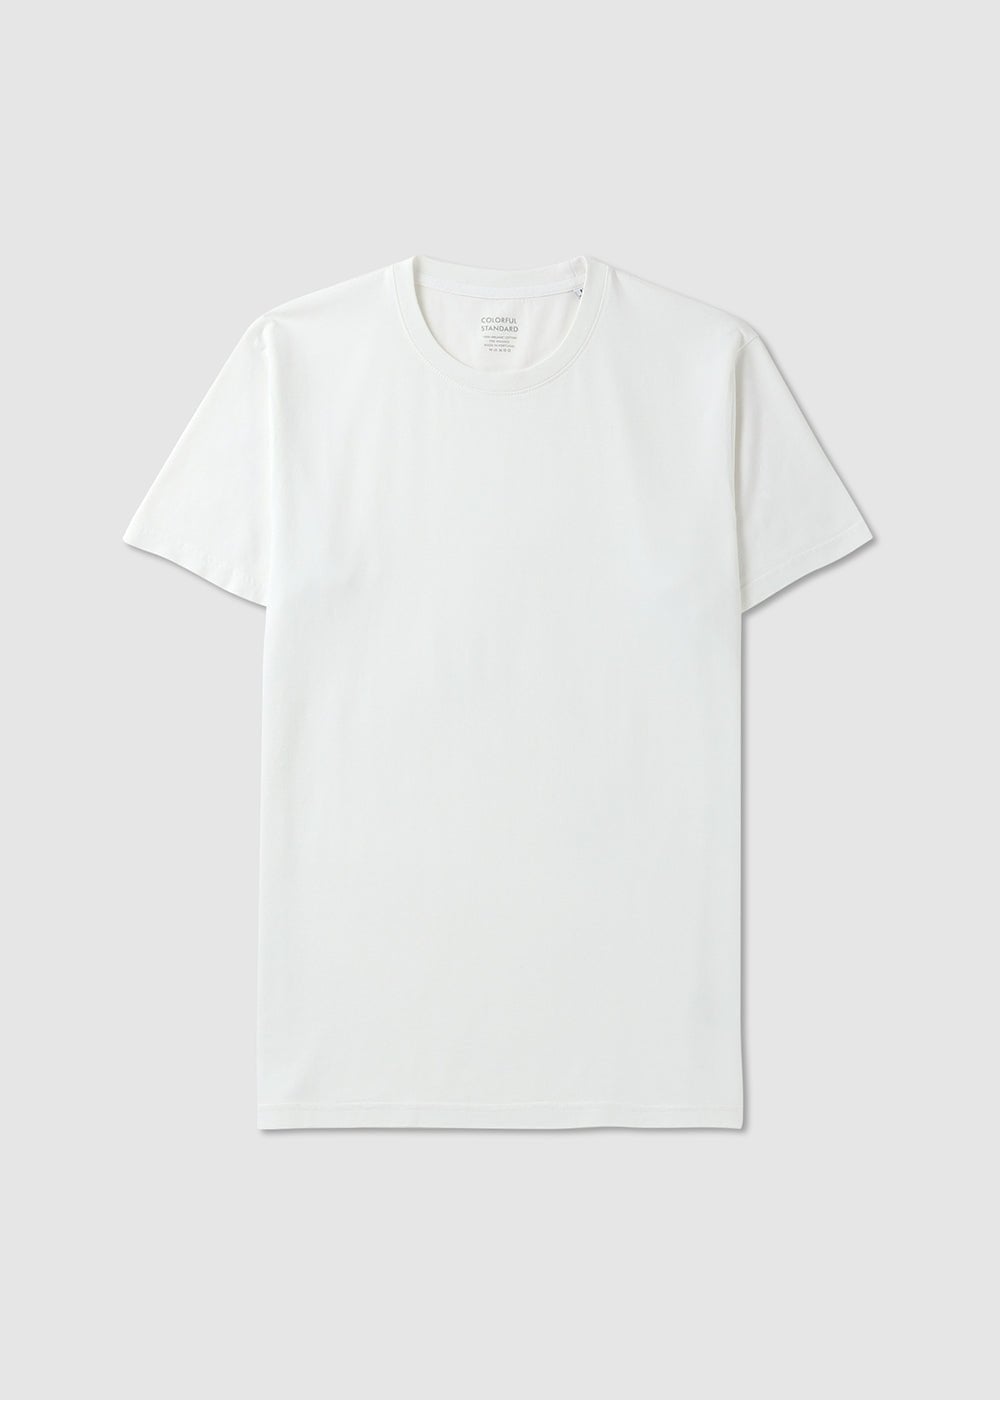 Colorful Standard Mens Classic Organic T-shirt In Optical White